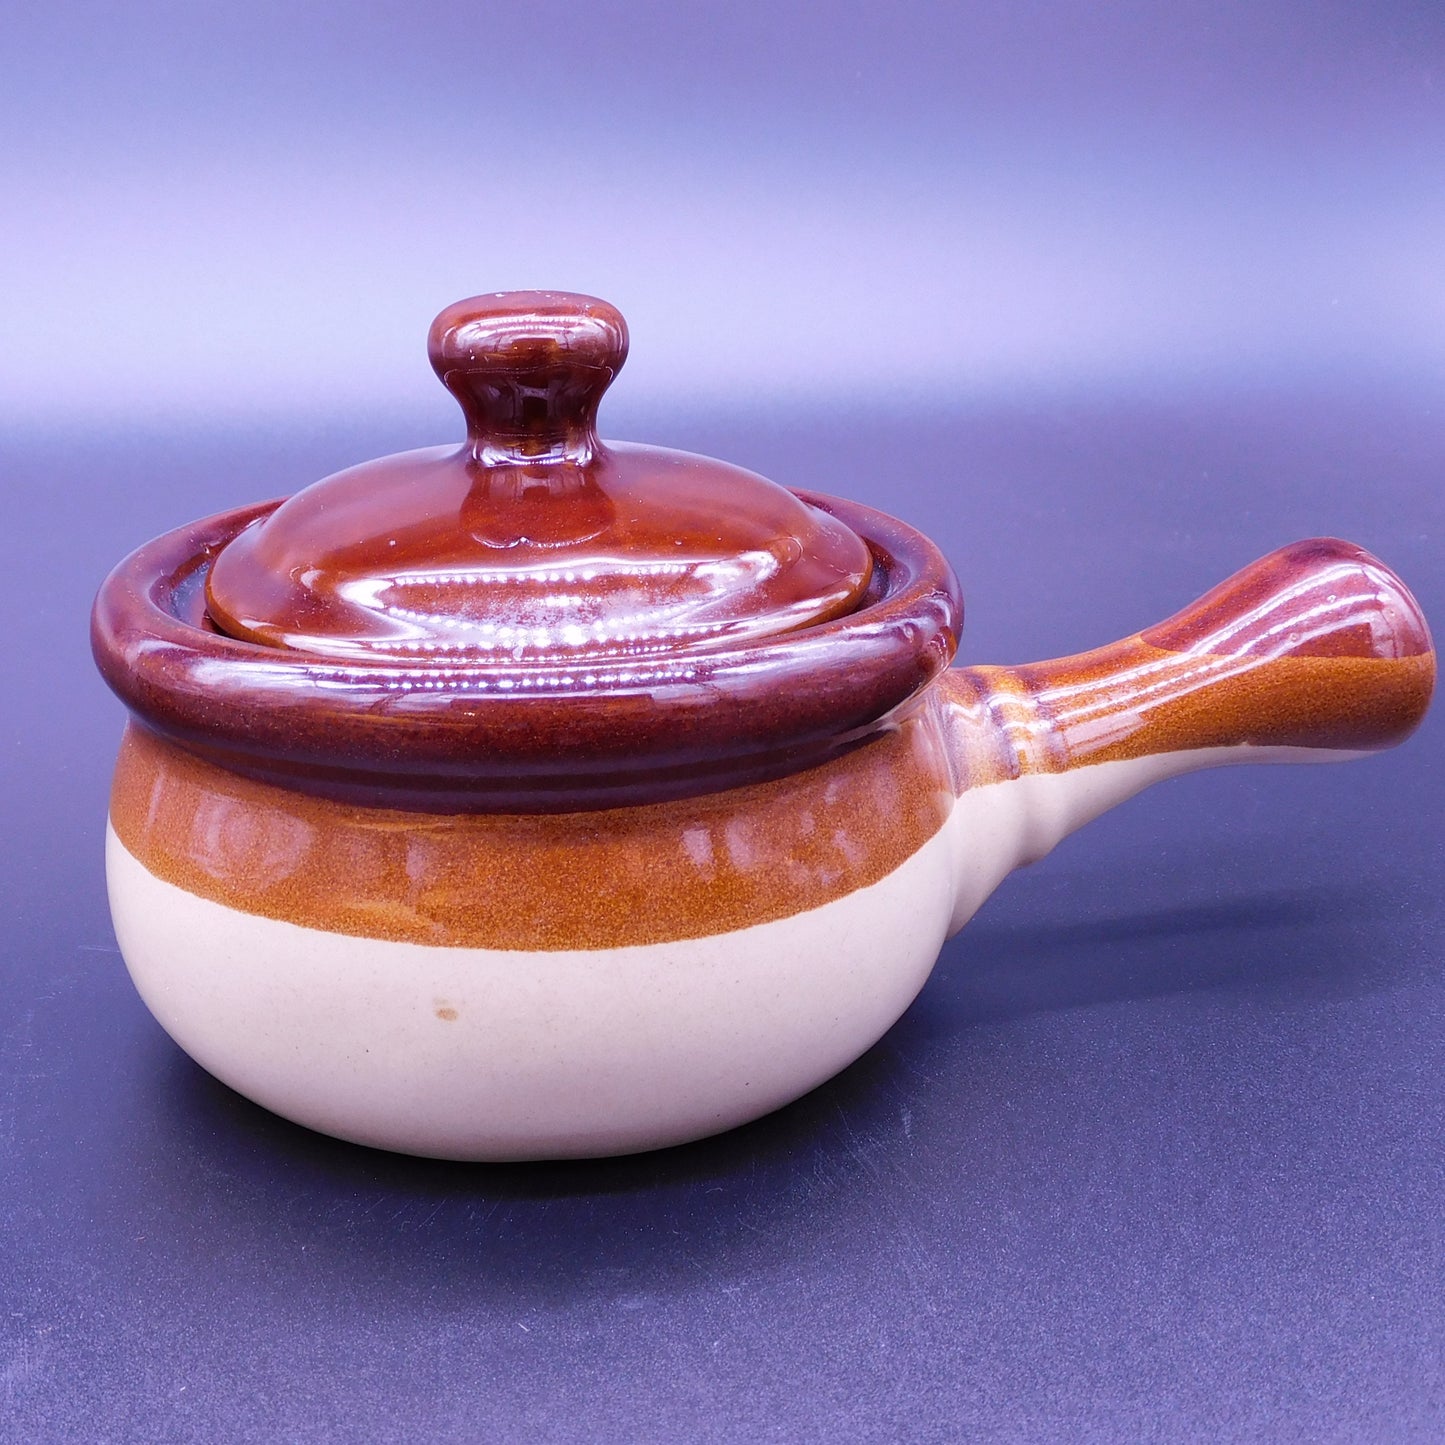 Vintage Stoneware French Onion Soup Bowl with Handle and Lid (7034) FREE SHIPPING!!